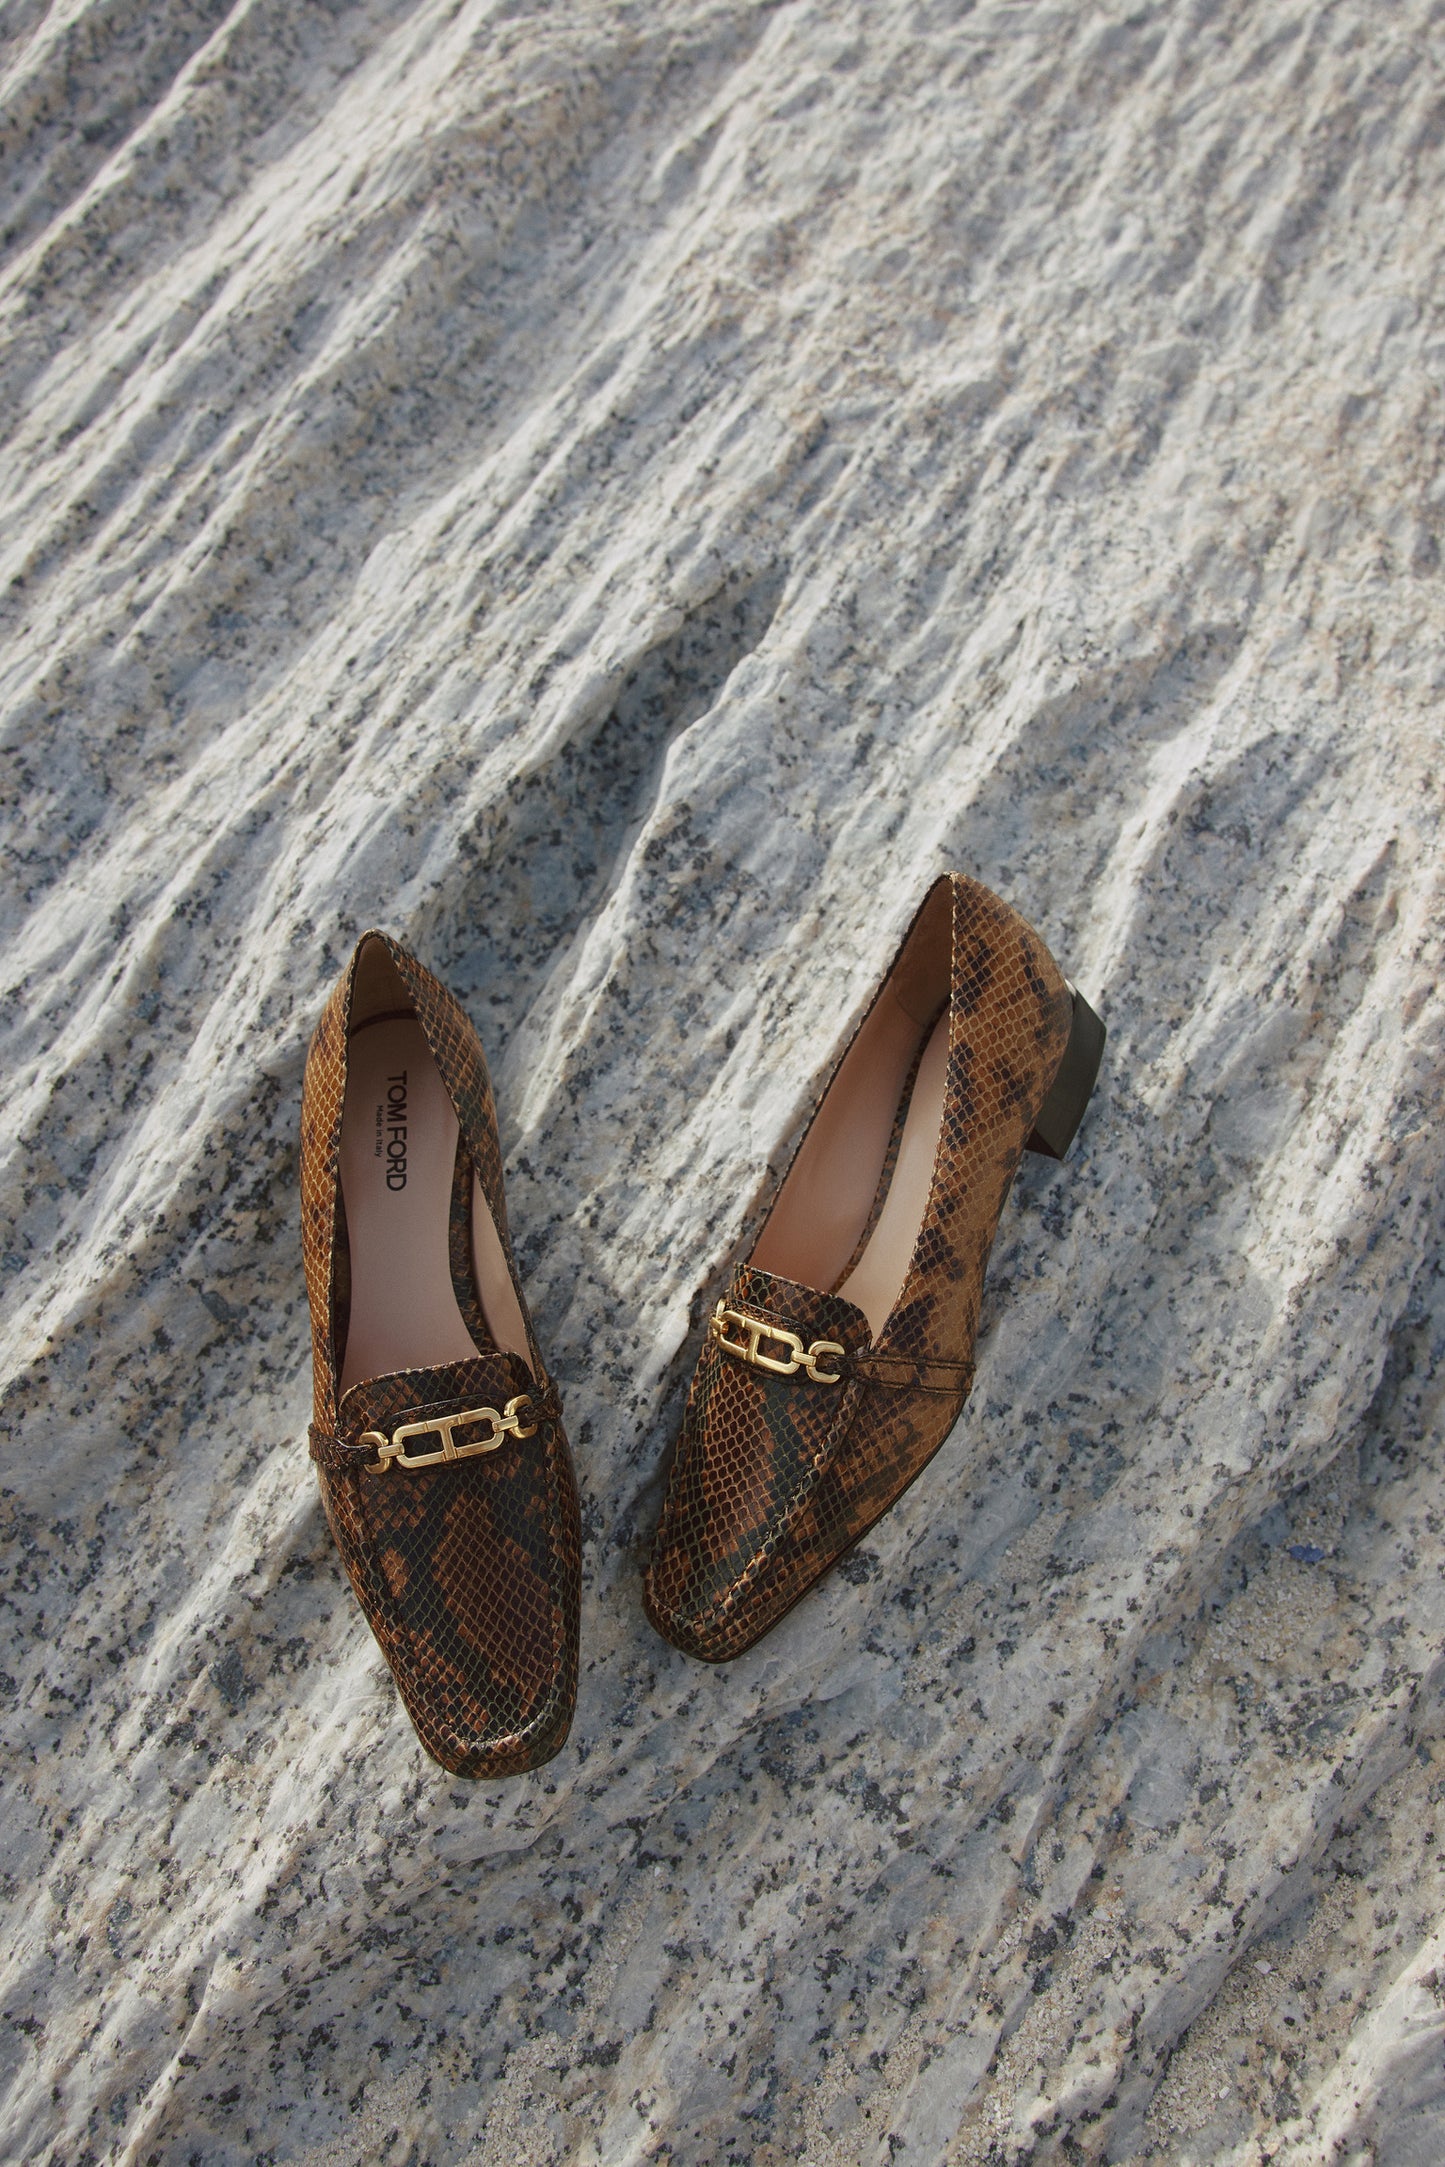 Loafer in CaramelTom Ford - Anita Hass